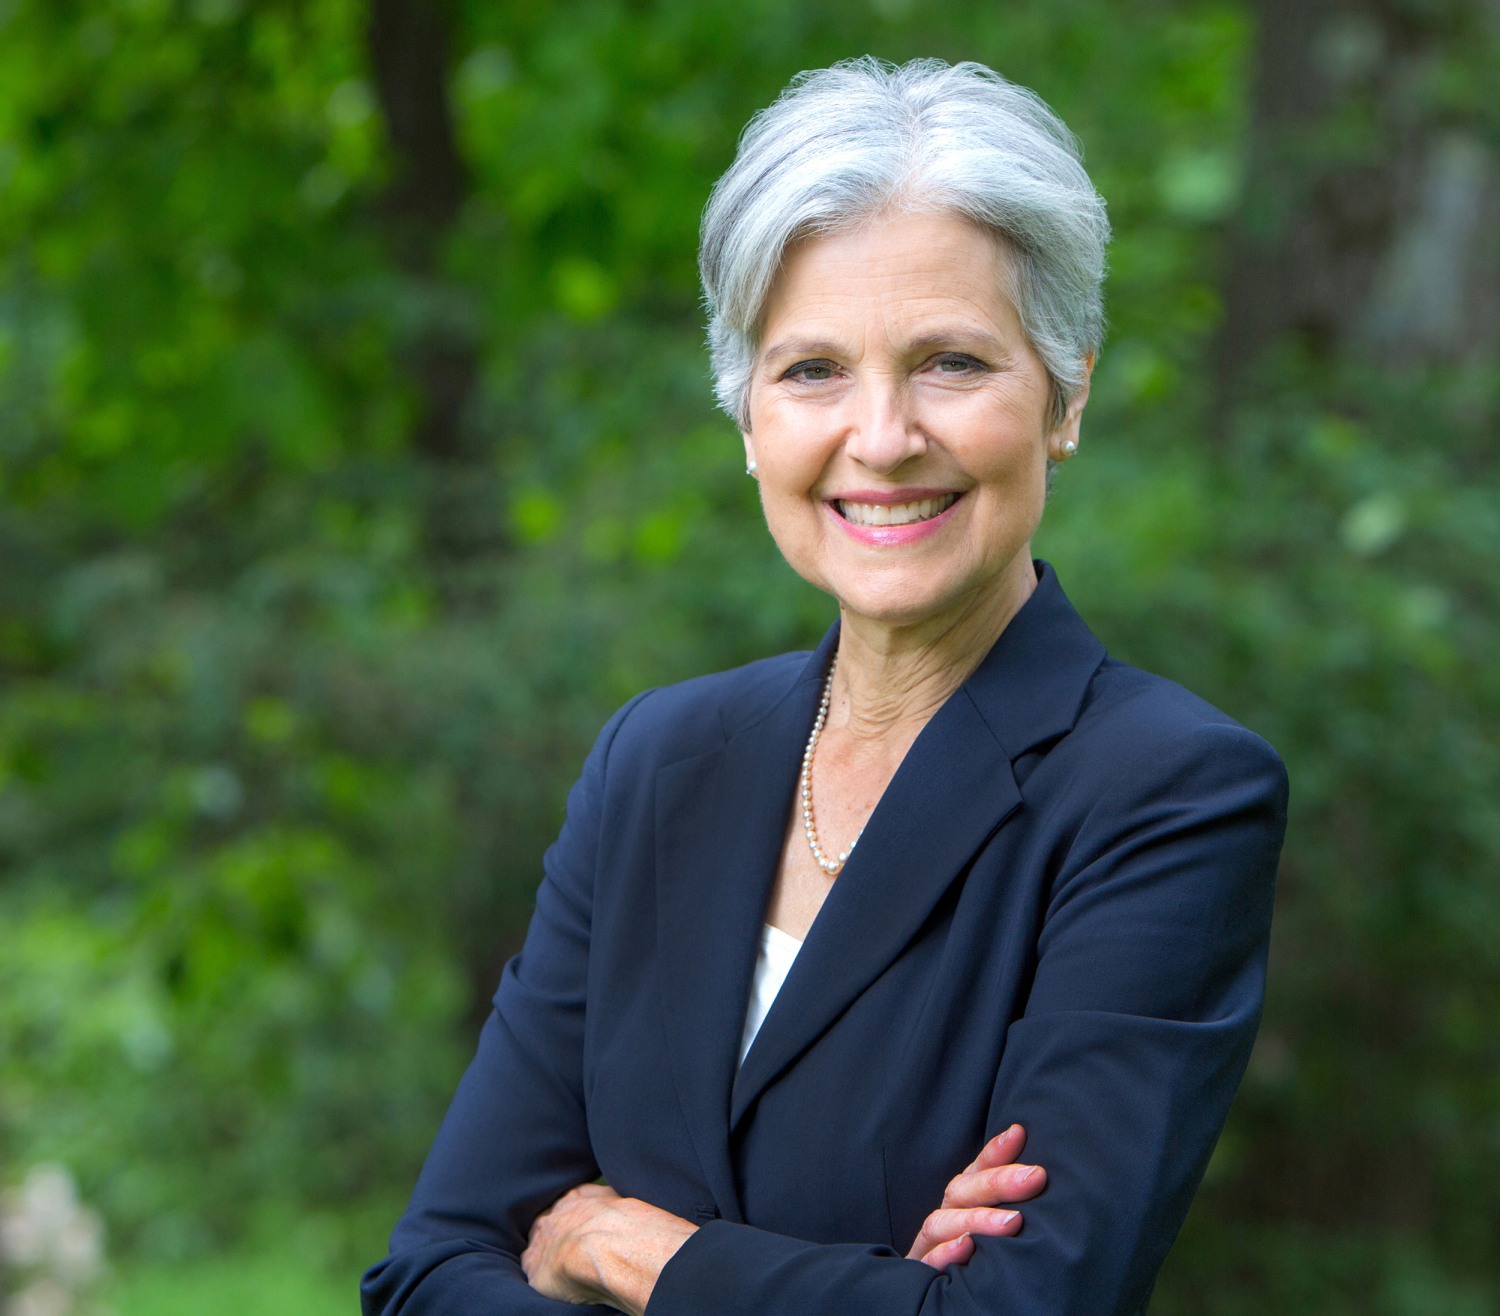 Meet Jill Stein, the Green Party Candidate for President